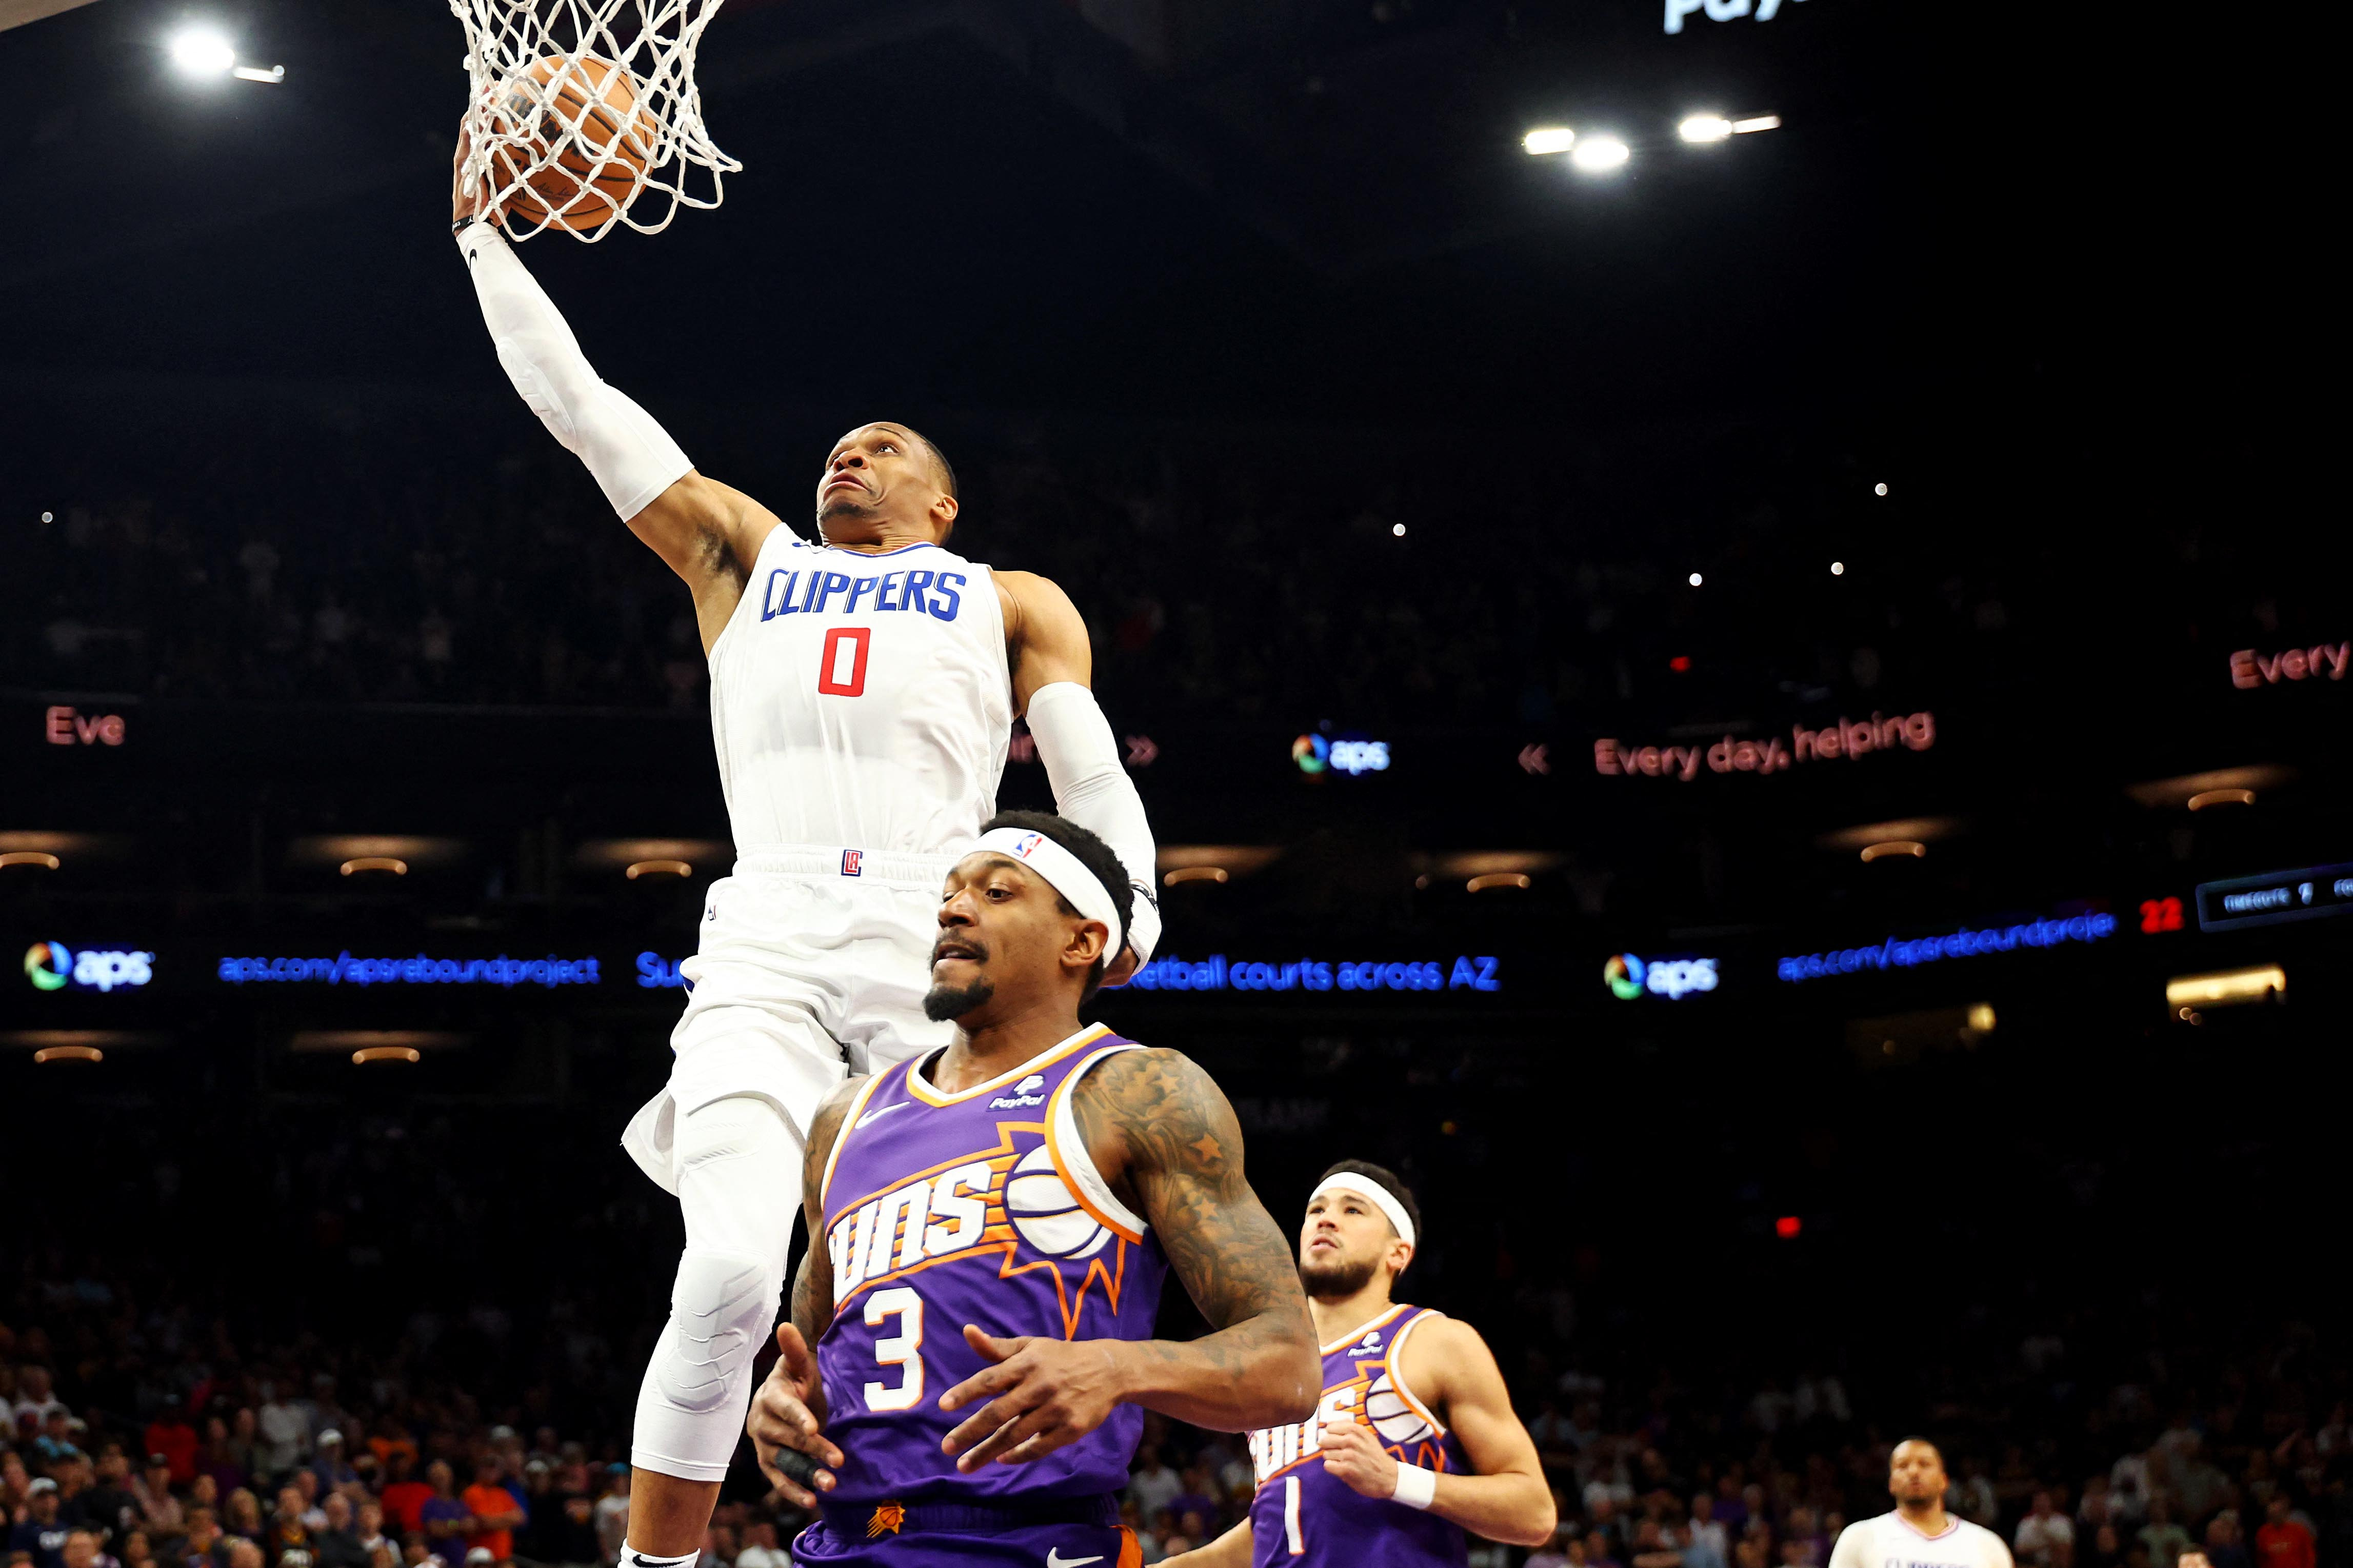 NBA: Russell Westbrook, Clippers hold off Suns’ comeback